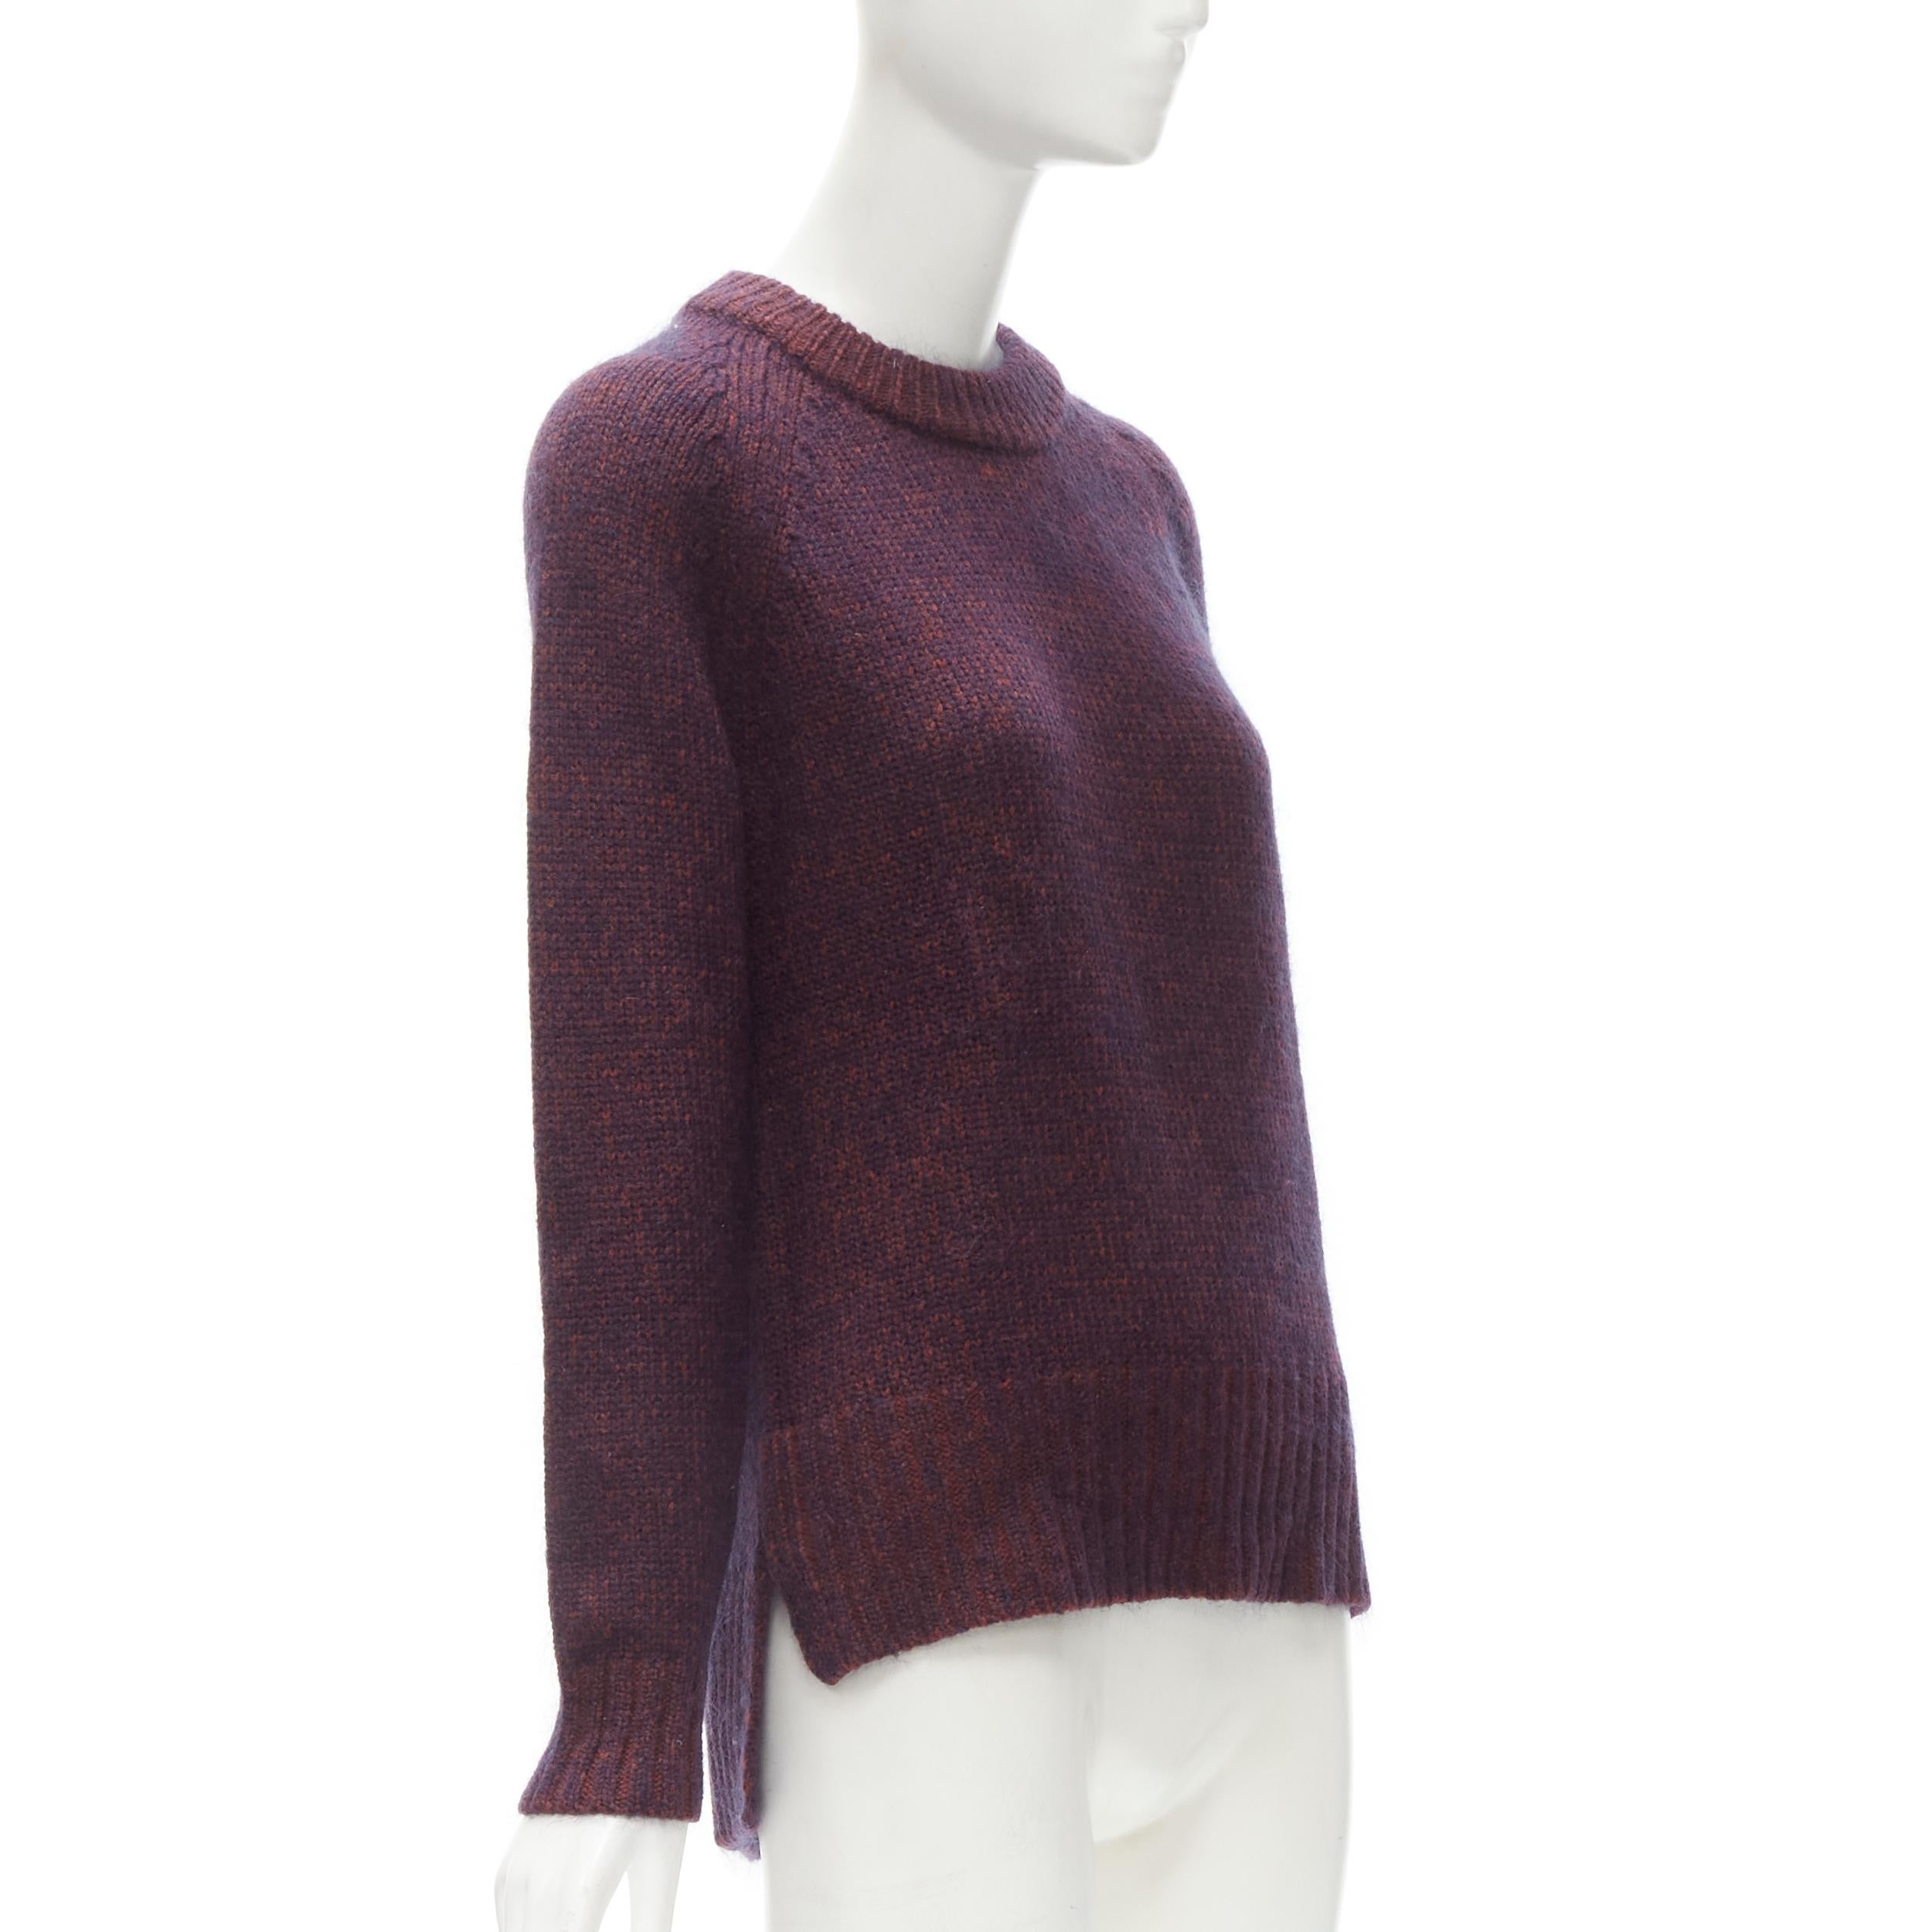 THEORY burgundy navy wool mohair knit step hem sweater S
Brand: Theory
Material: Wool
Color: Burgundy
Pattern: Solid
Made in: China

CONDITION:
Condition: Excellent, this item was pre-owned and is in excellent condition. 

SIZING:
Designer Size: